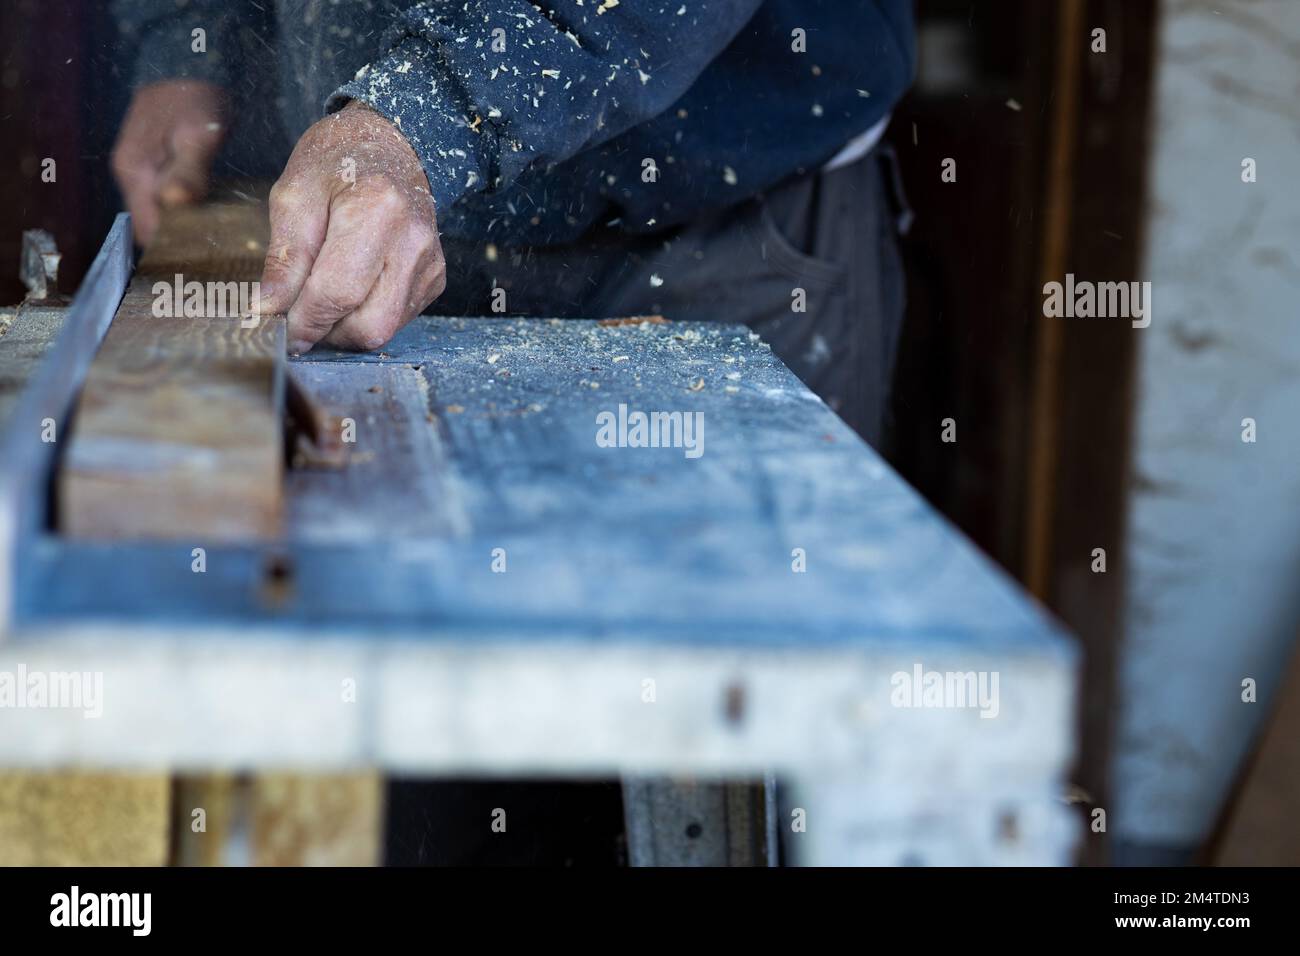 sawdust flies around as a worker,carpenter cuts a wooden batten on a circular saw. Close-up photo of a worker's hand holding a wooden lath Stock Photo